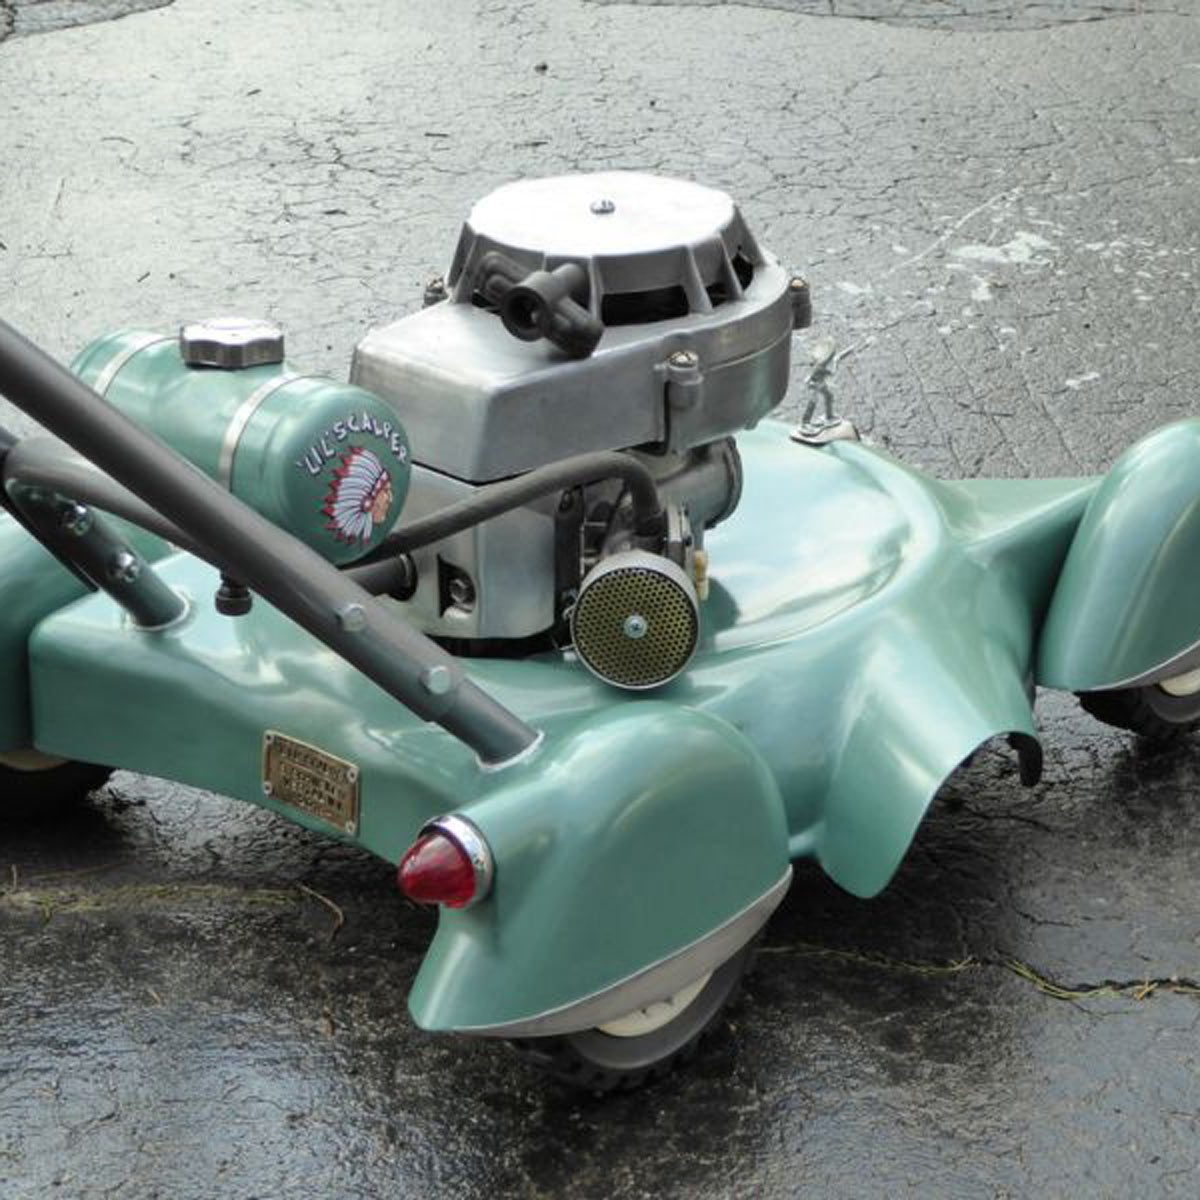 12 Tricked-Out Lawn Mowers You Need to See